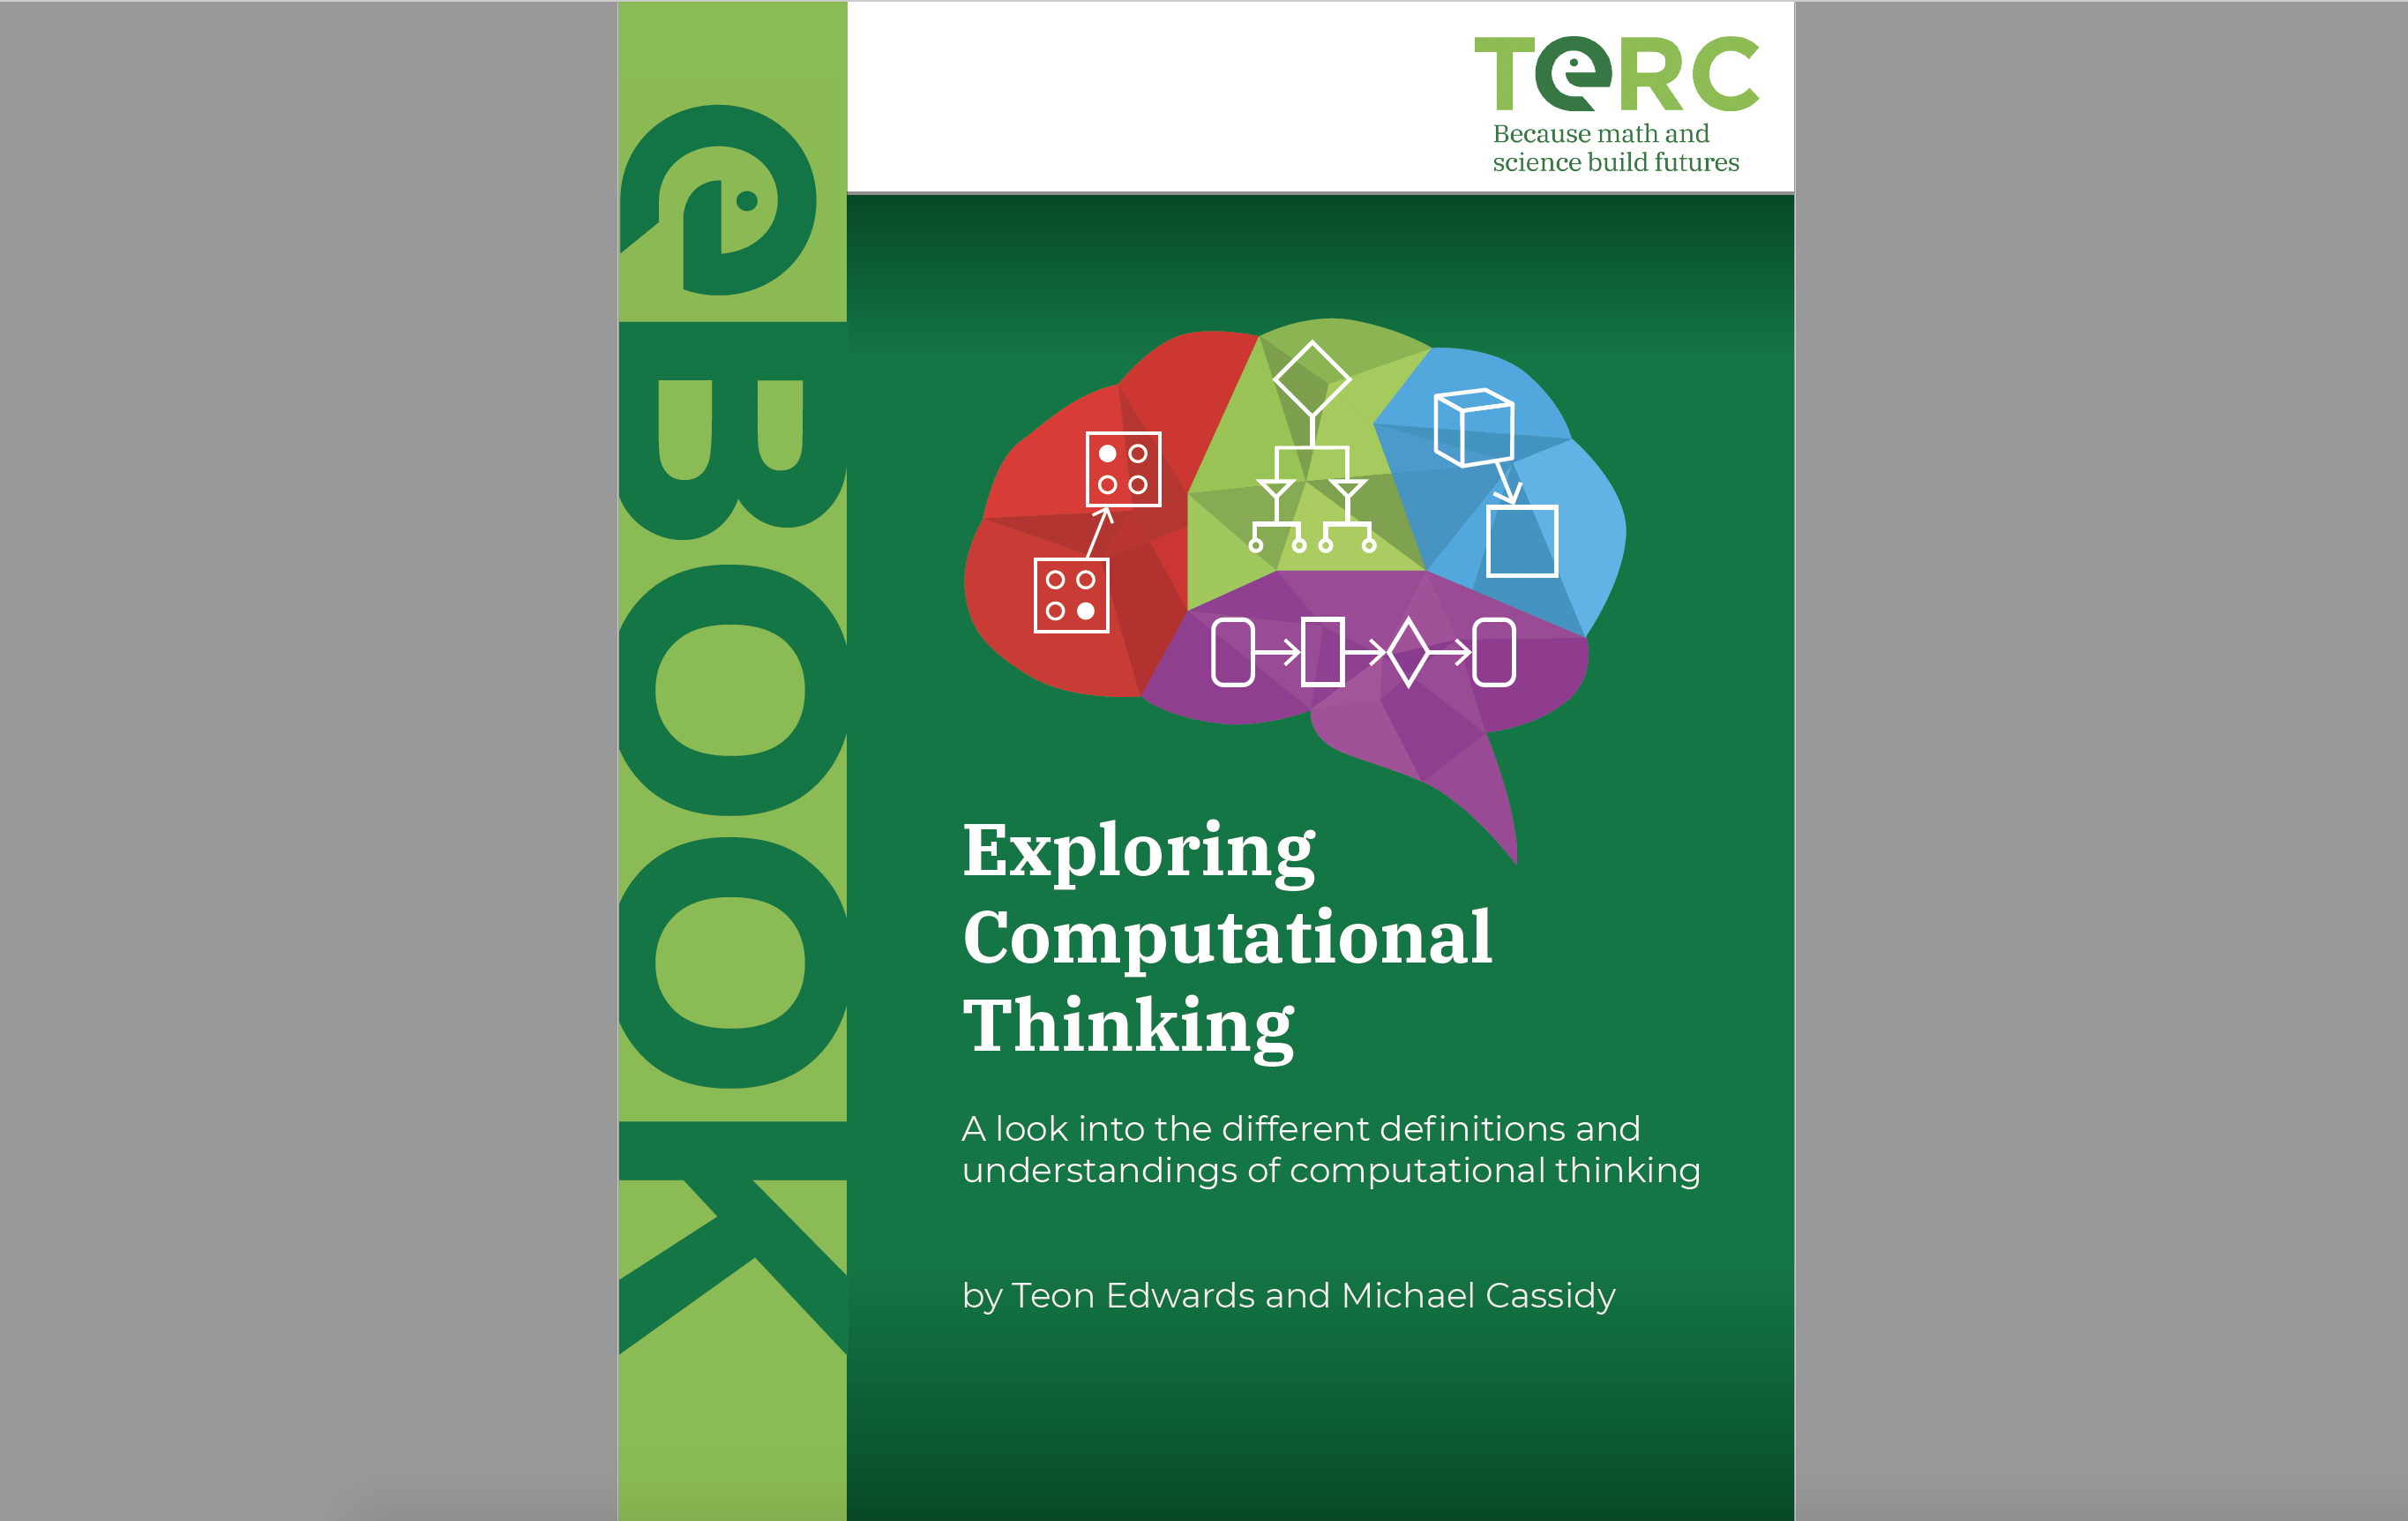 TERC’s Computational Thinking blog series is available as an eBook!